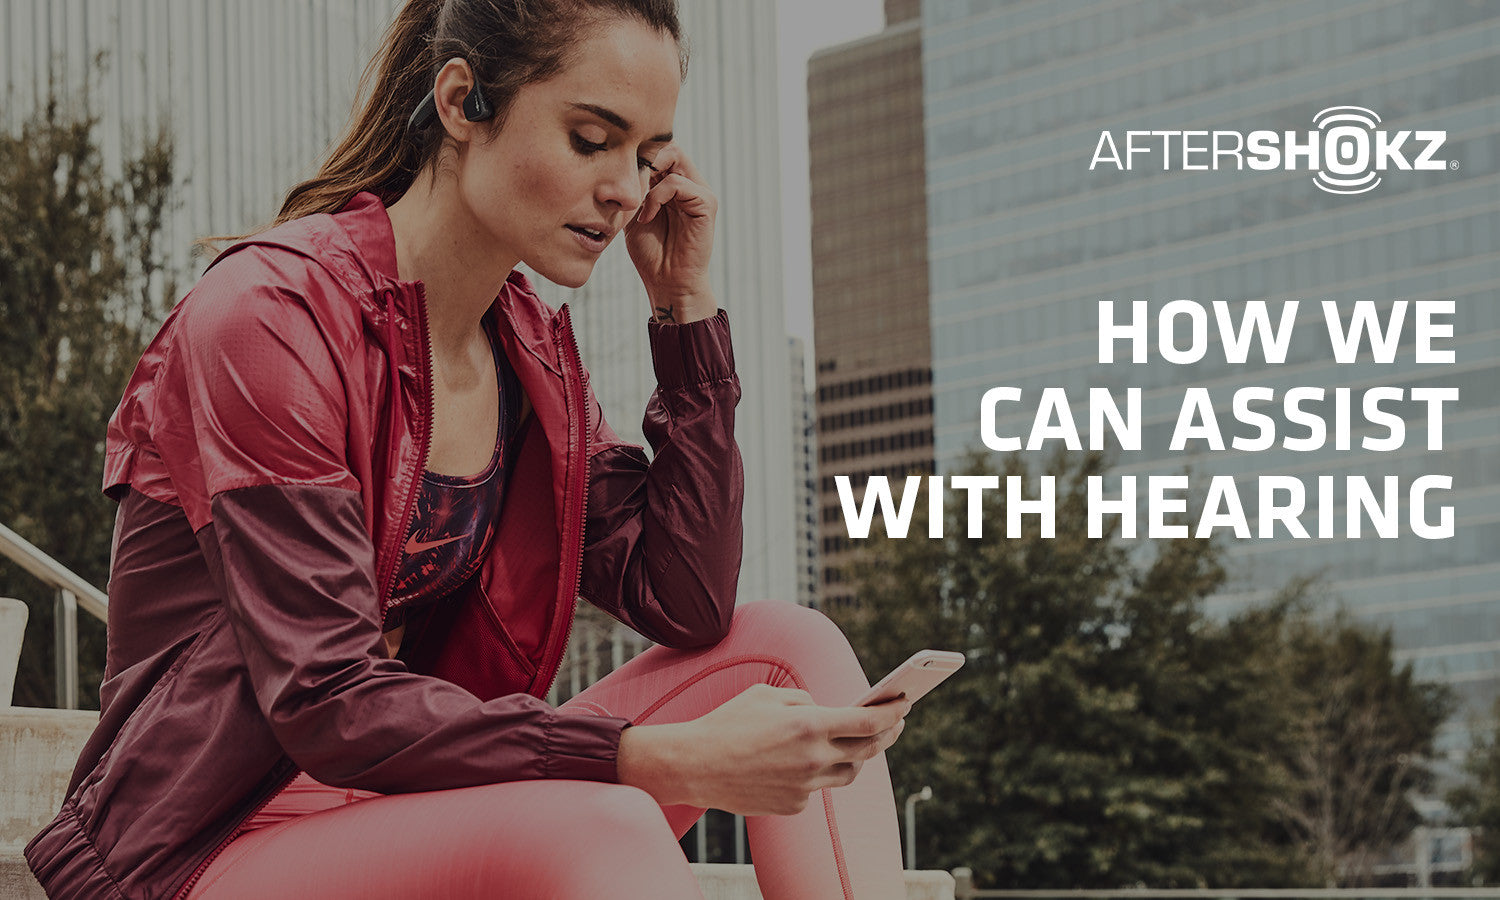 Can AfterShokz Assist With Hearing?